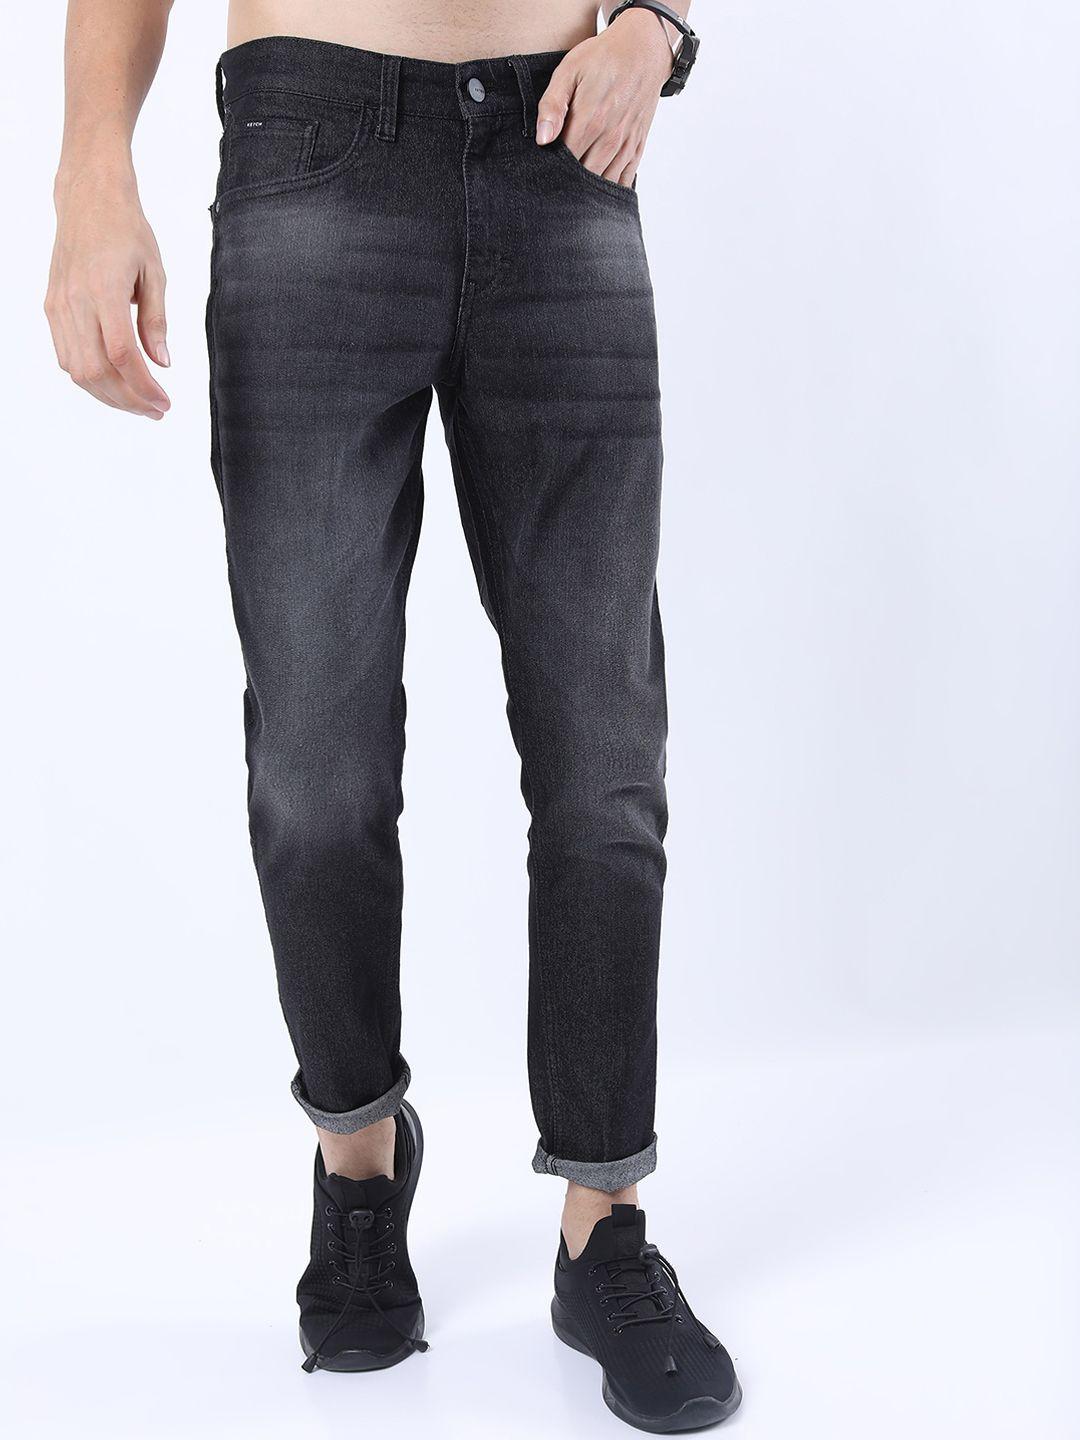 ketch-men-charcoal-tapered-fit-low-distress-light-fade-stretchable-jeans